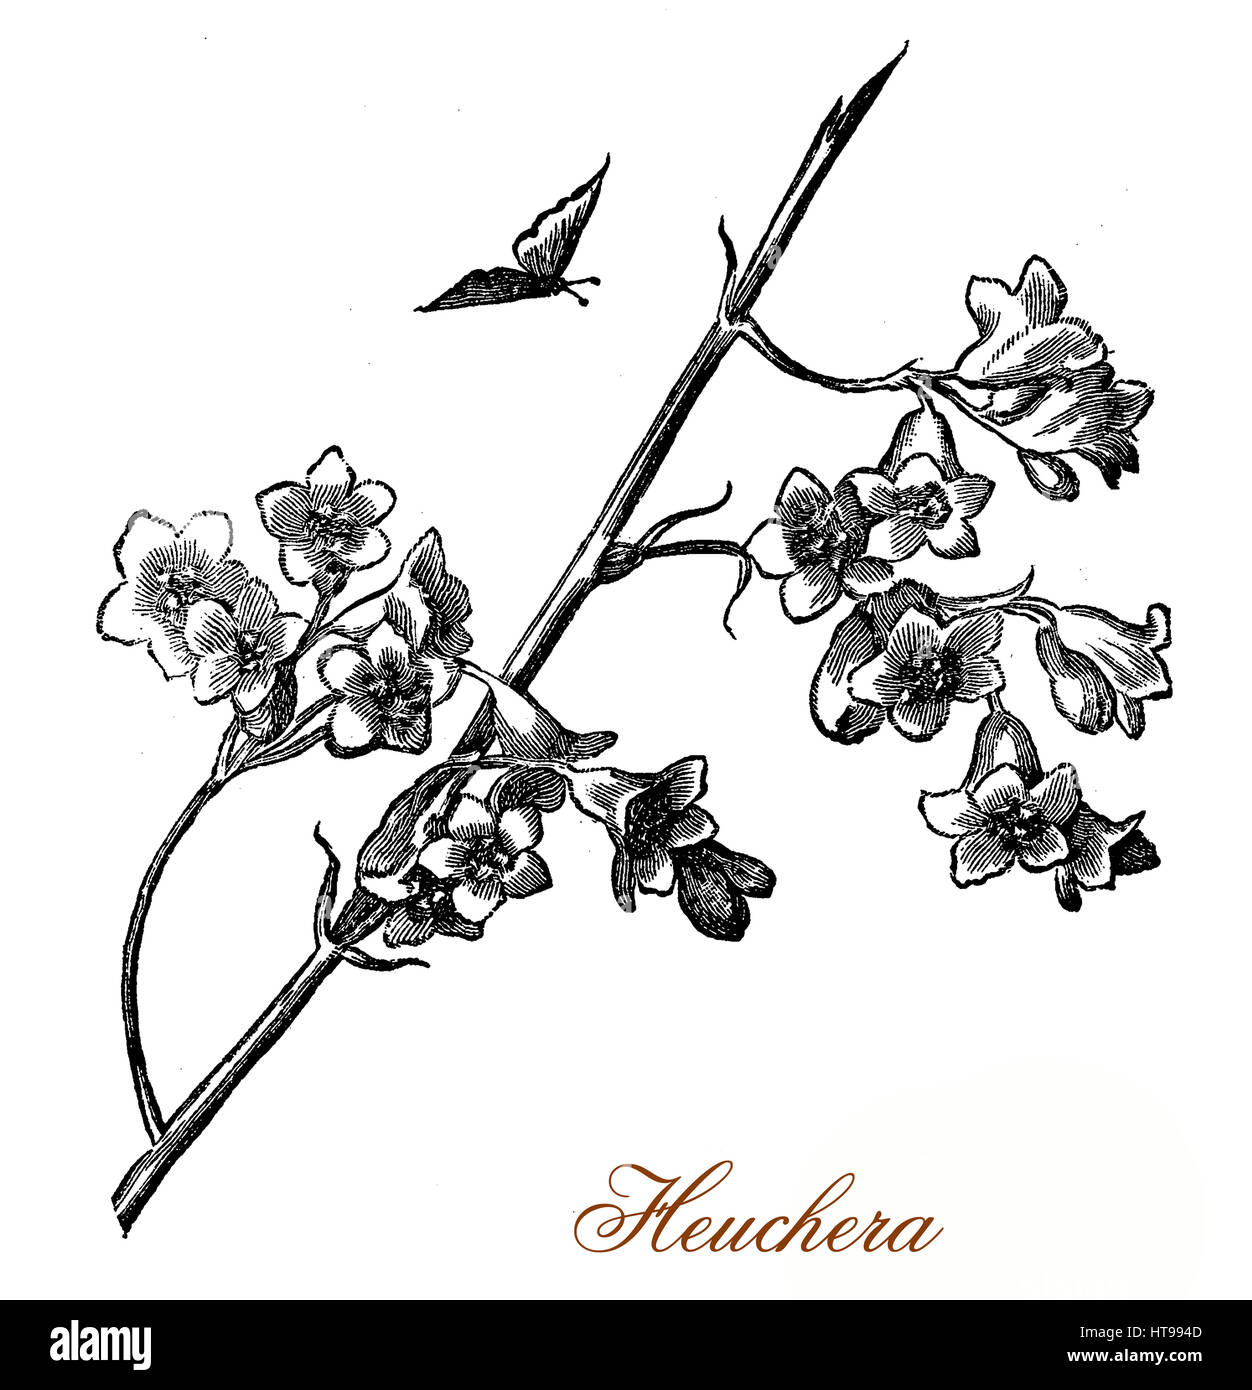 Vintage engraving of heuchera, ornamental plant with bell shaped flowers  also used in herbal medicine Stock Photo